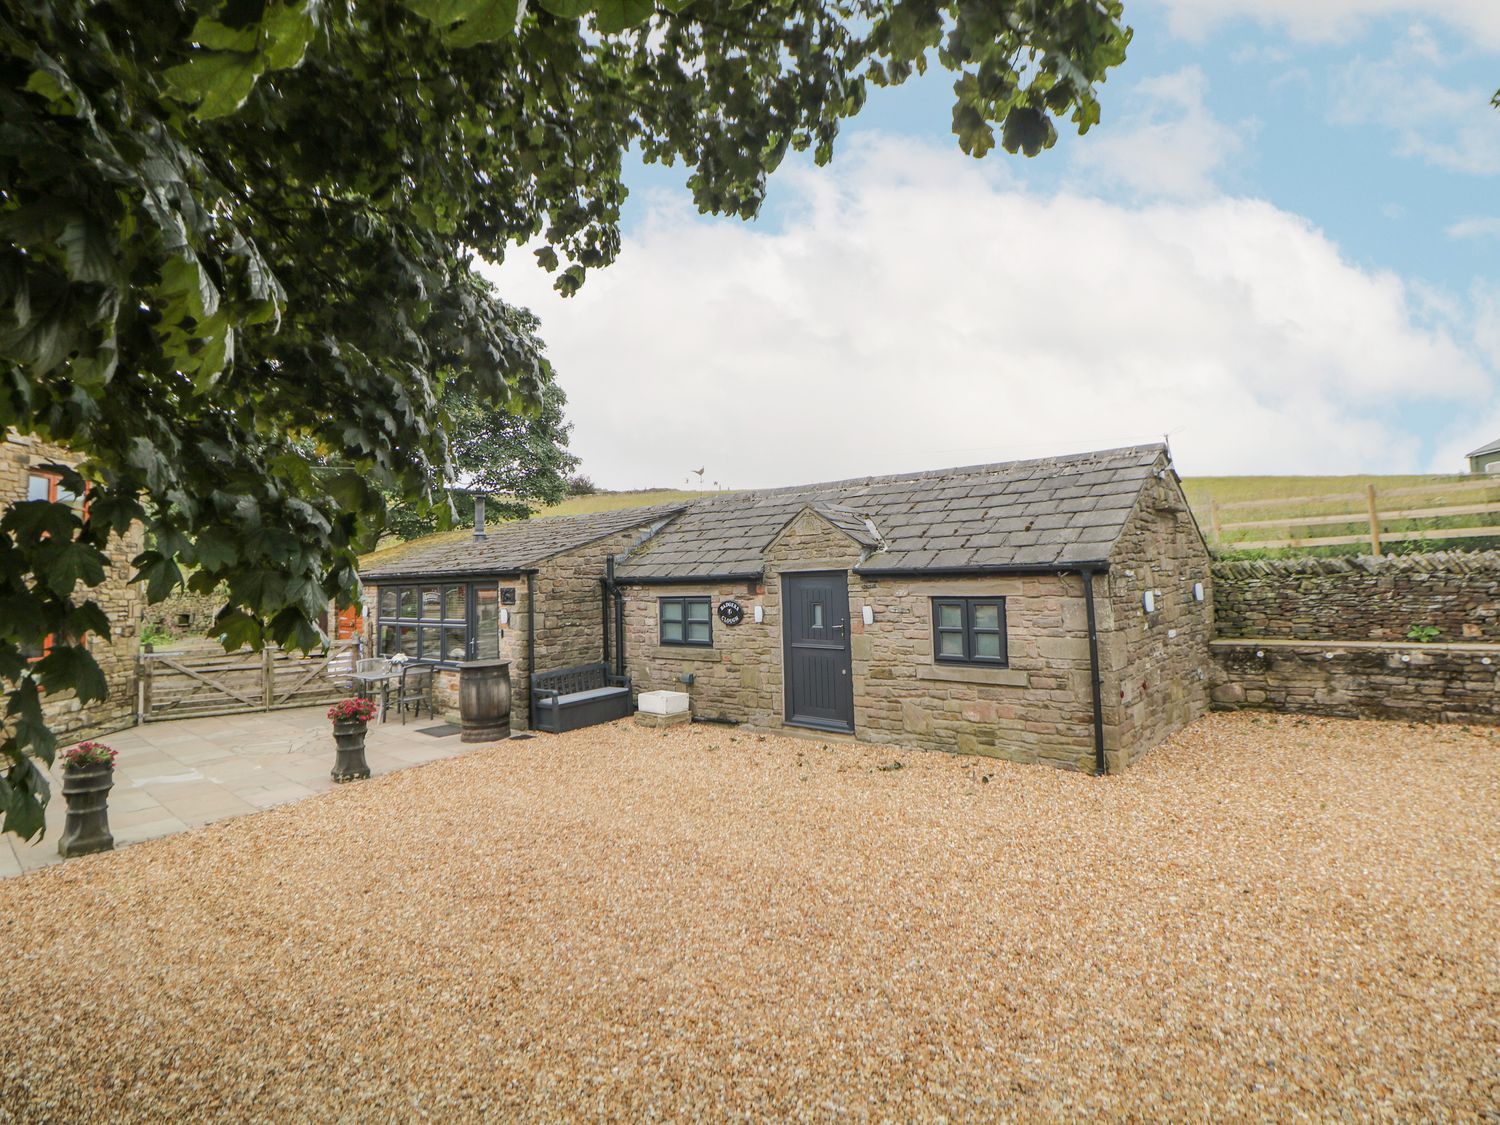 The Stables  at Badgers Clough Farm - Peak District - 1137814 - photo 1